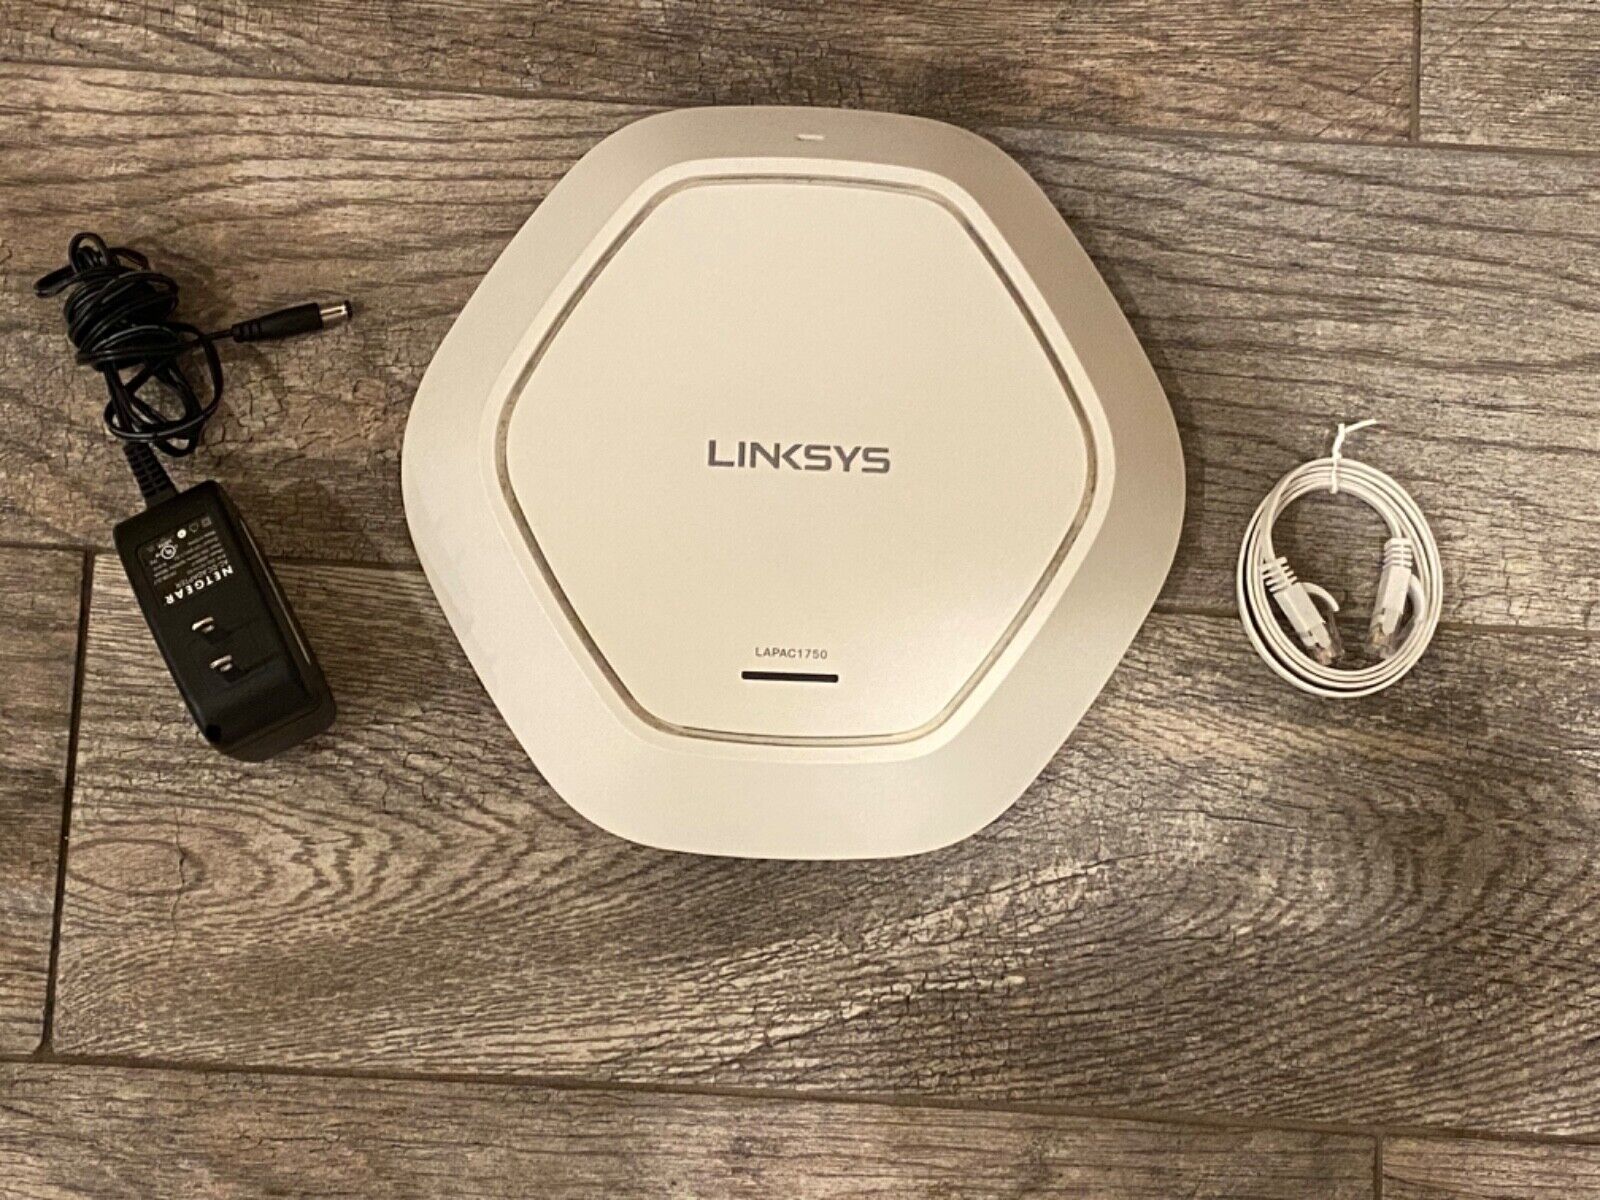 Linksys LAPAC1750 Dual-Band Cloud Wireless Access Point - White